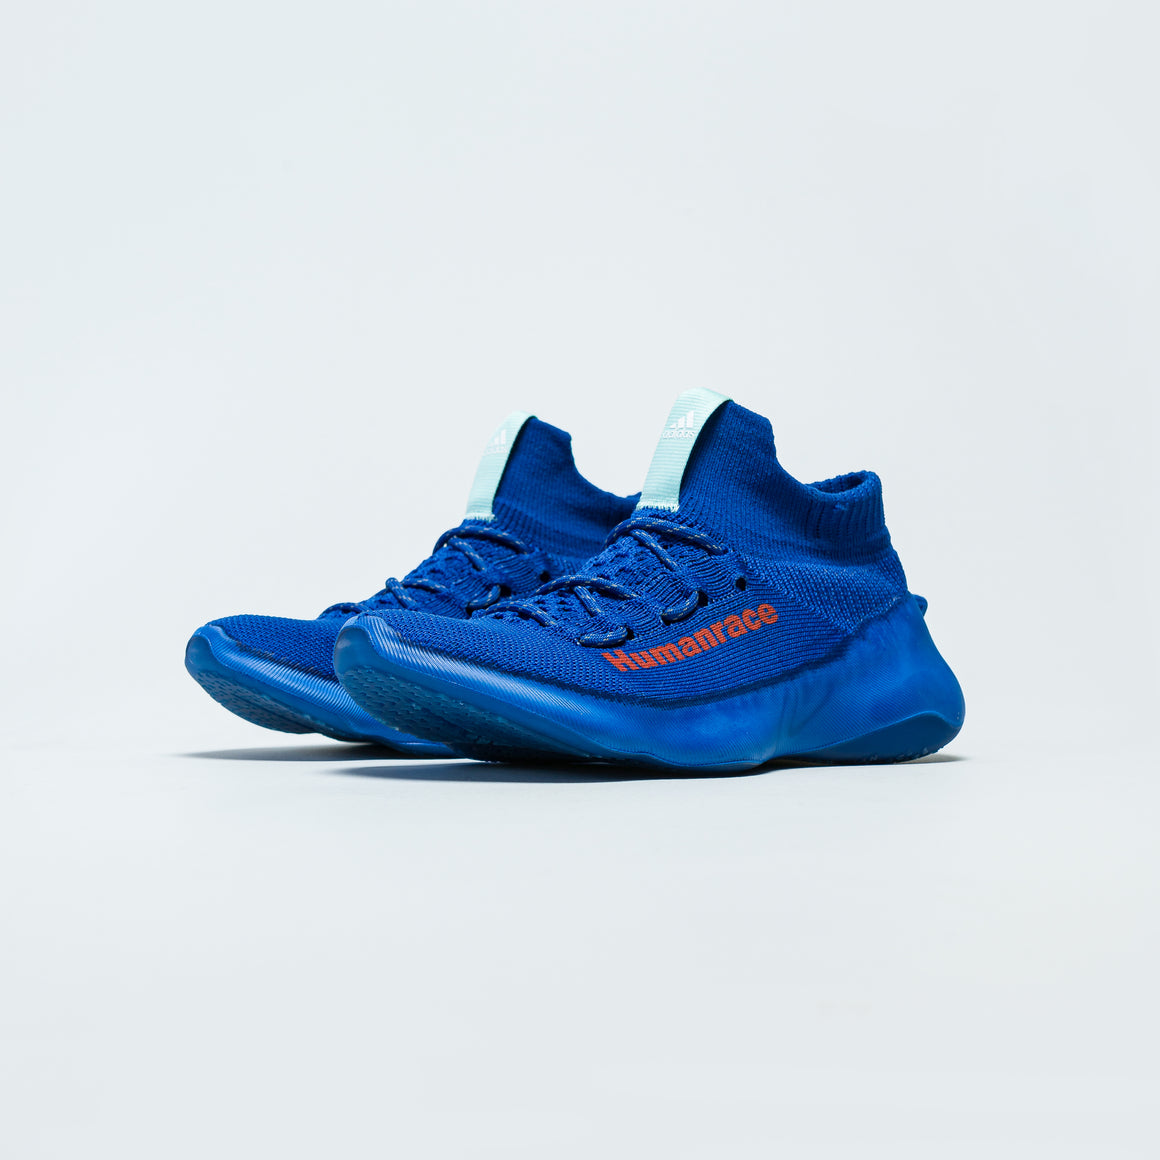 Adidas Humanrace Sichona Royal Blue Easy Coral Up There